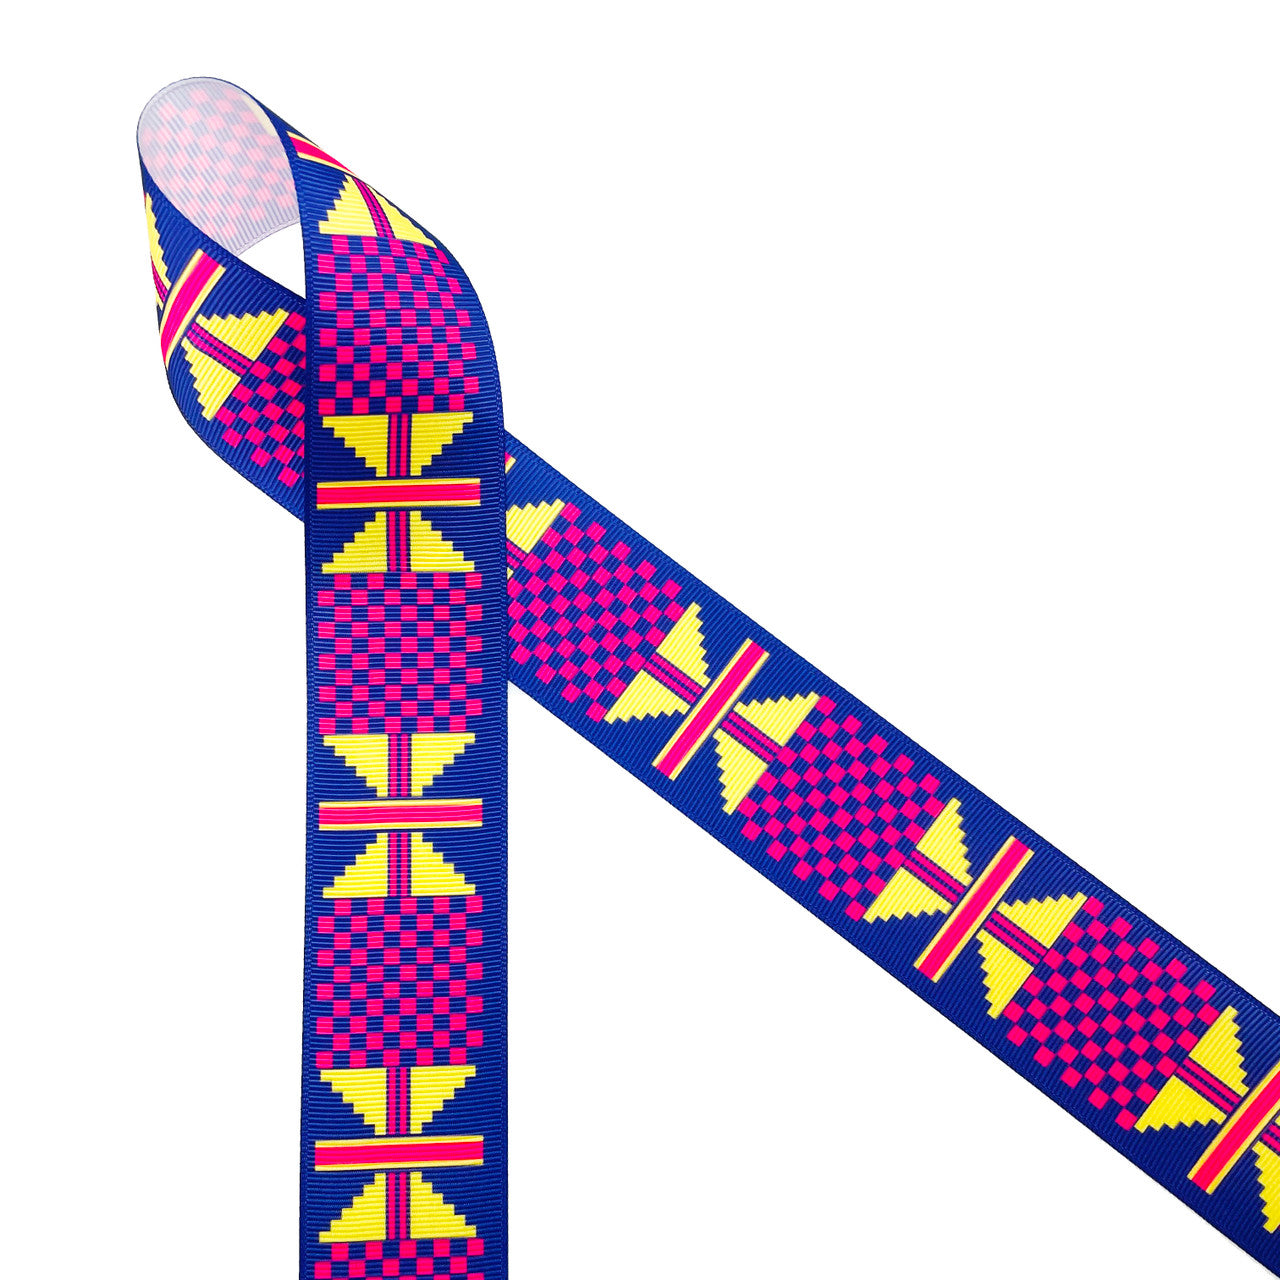 Ankara Kente African design in traditional colors of pink, purple, blue and red printed on 1.5" white grosgrain ribbon is an ideal ribbon for hair bows, headbands, sewing projects, crafts and festivals. All our ribbons are designed and printed in the USA